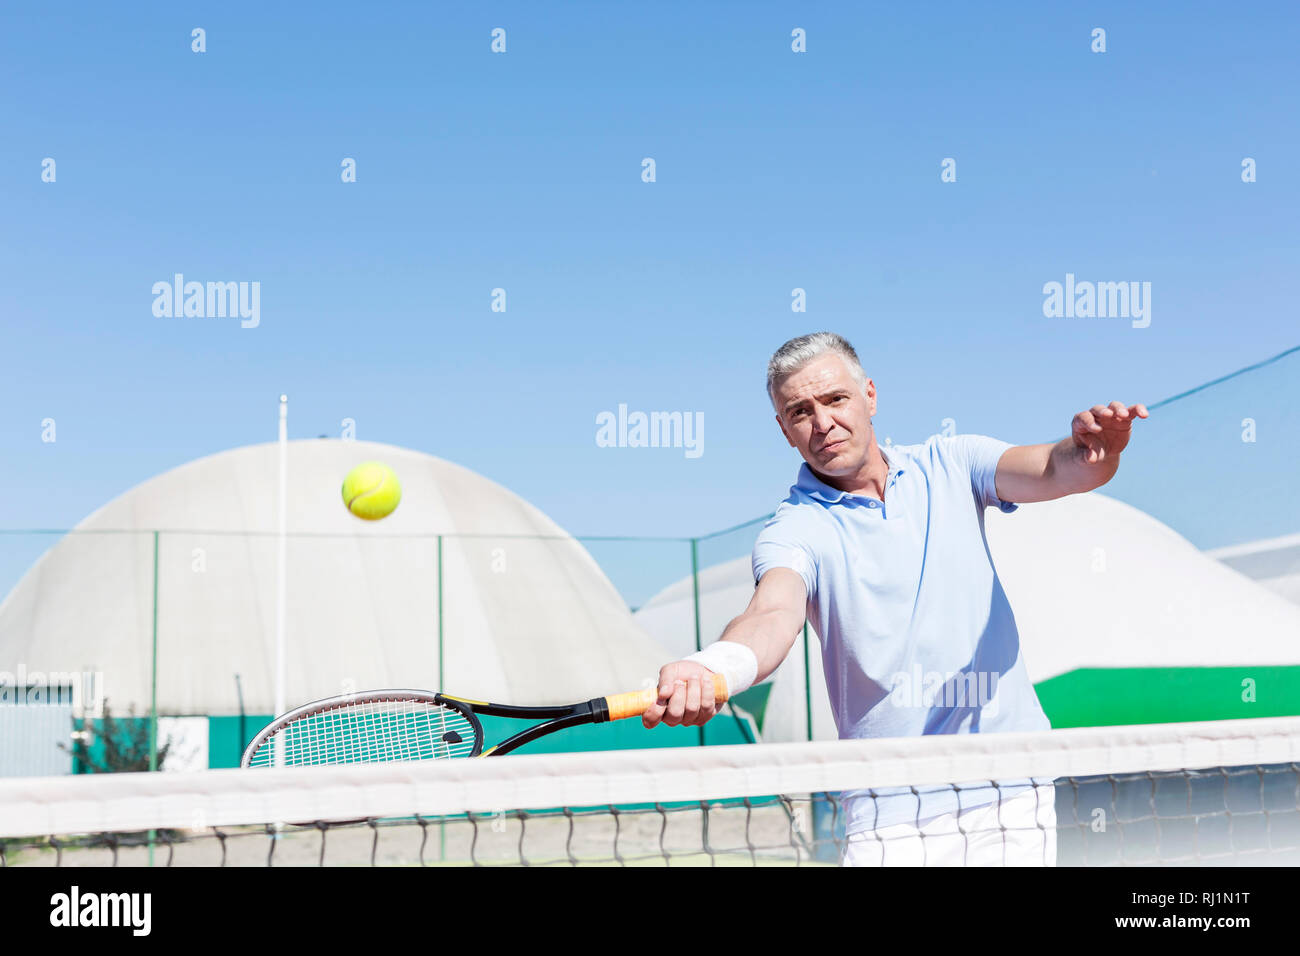 Confident mature man hitting tennis ball with racket on court against clear blue sky Stock Photo